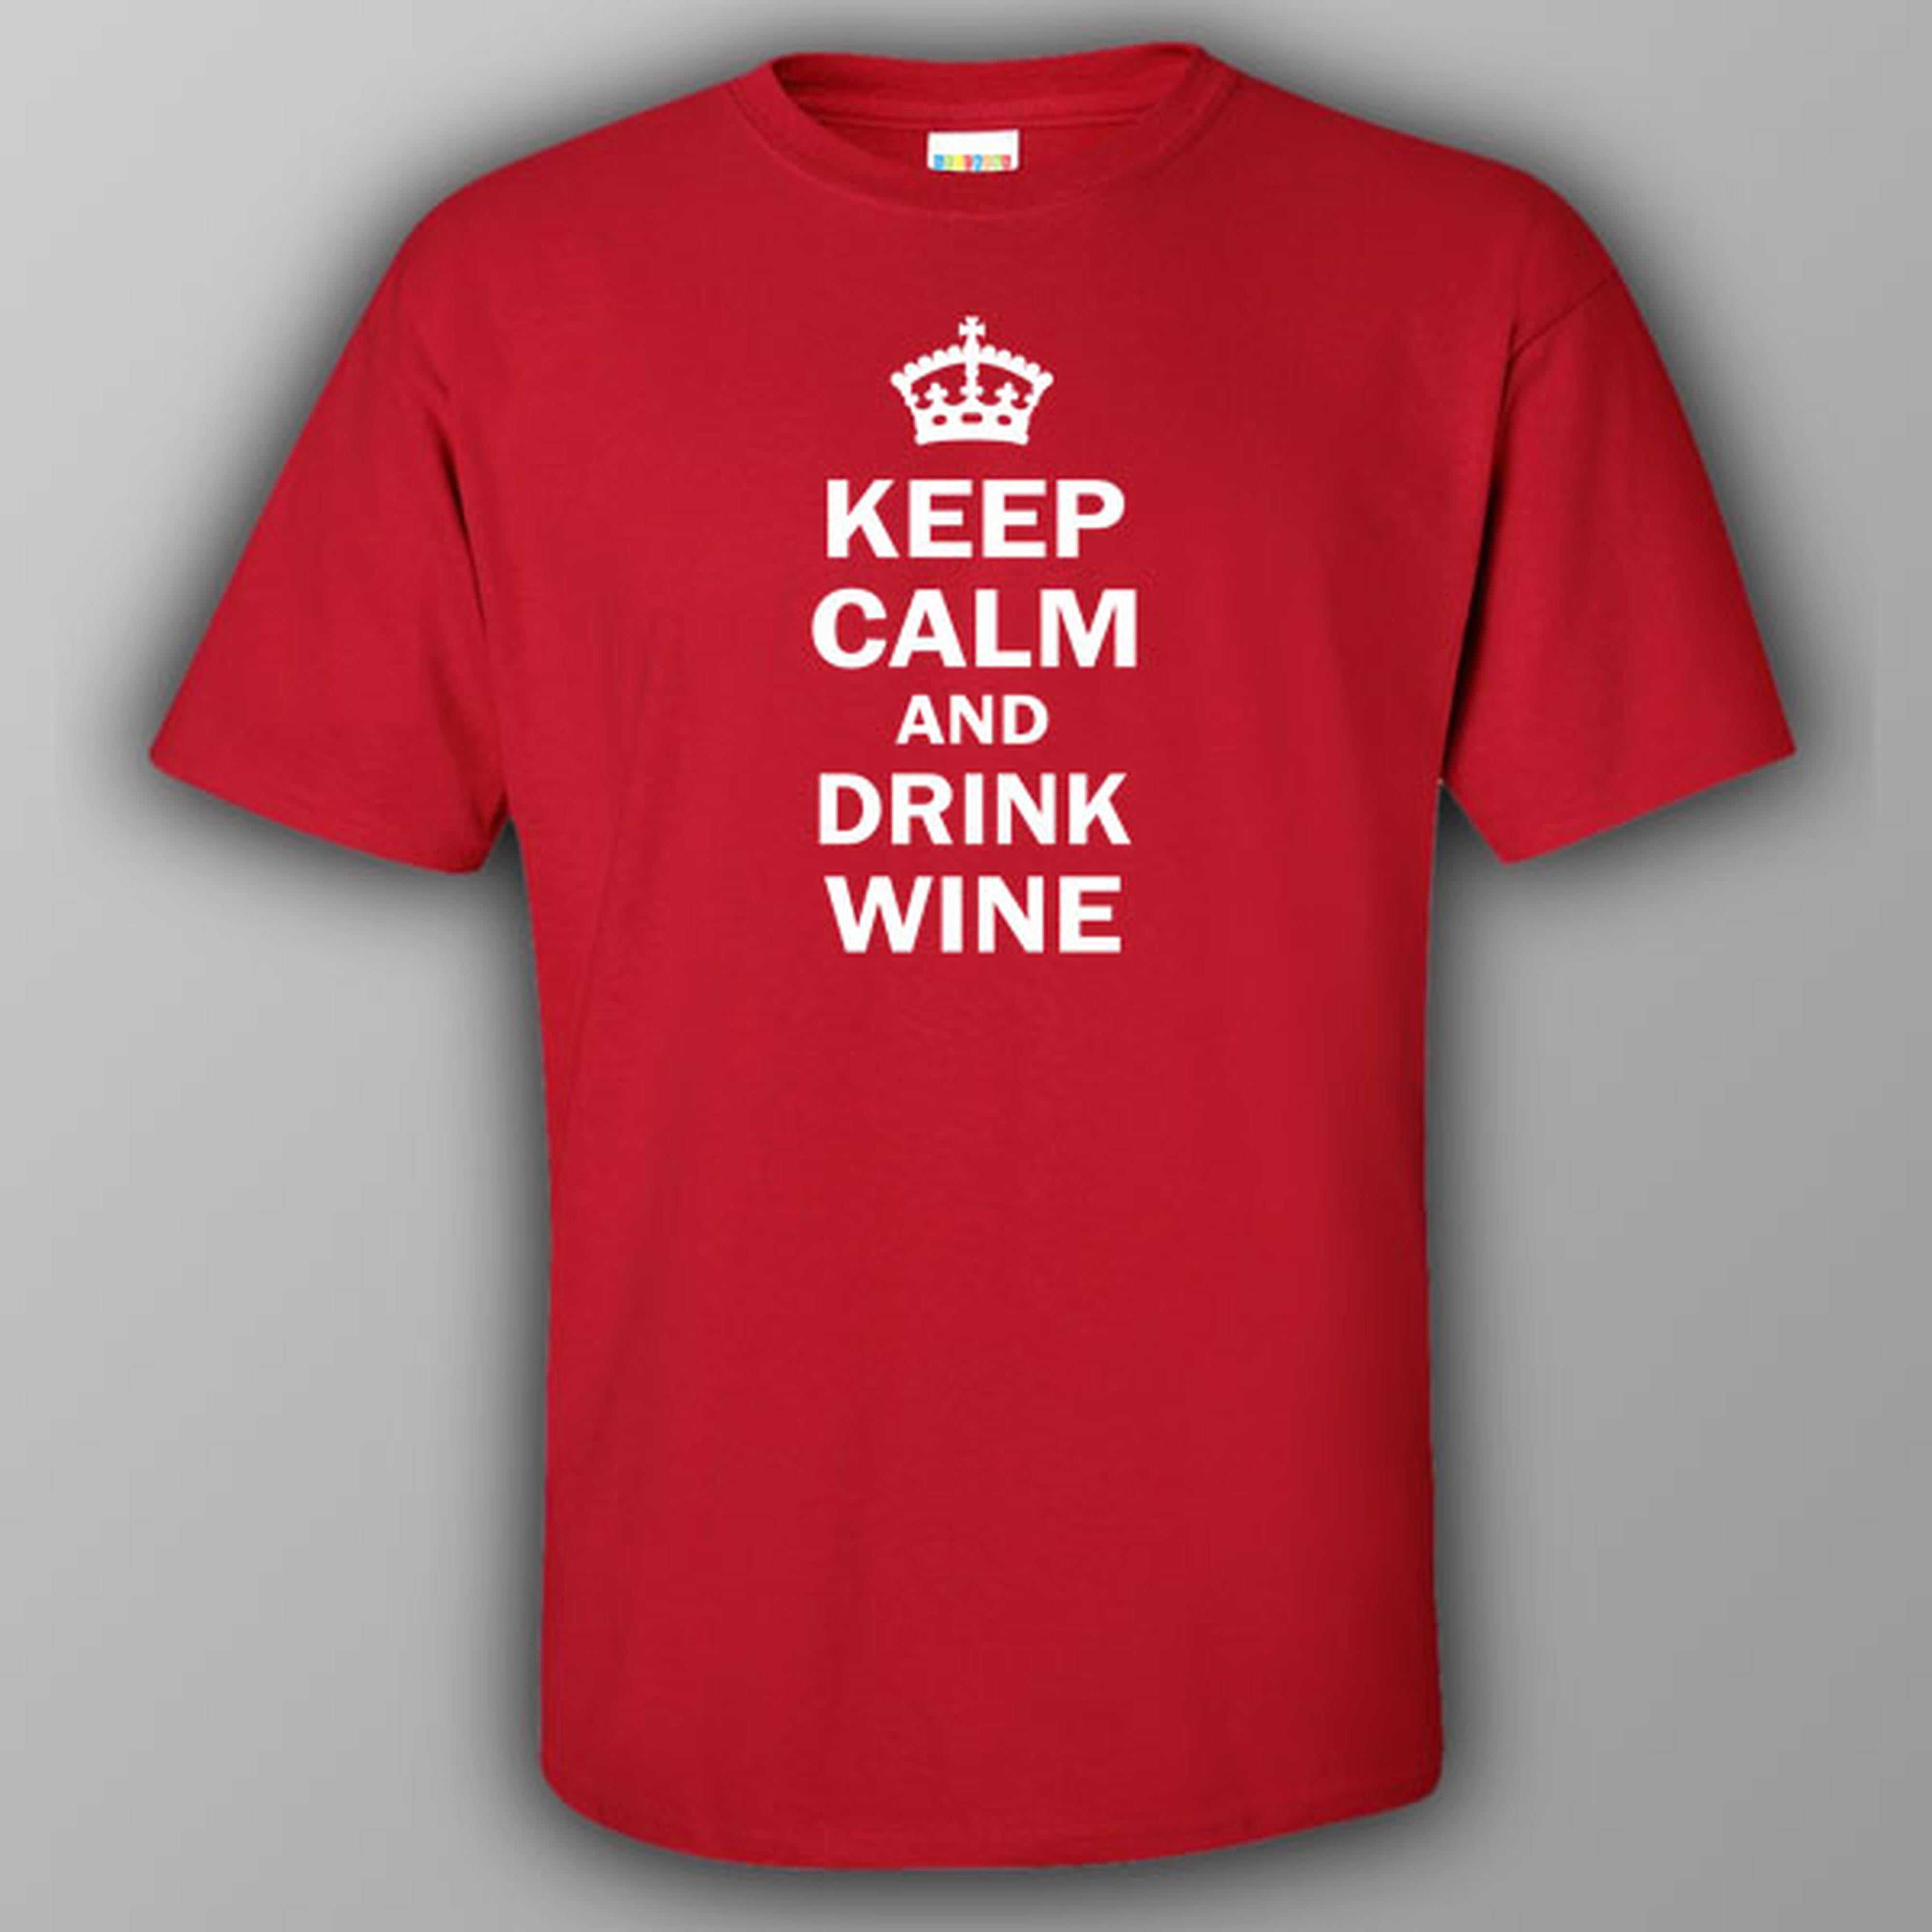 Keep calm and drink wine - T-shirt